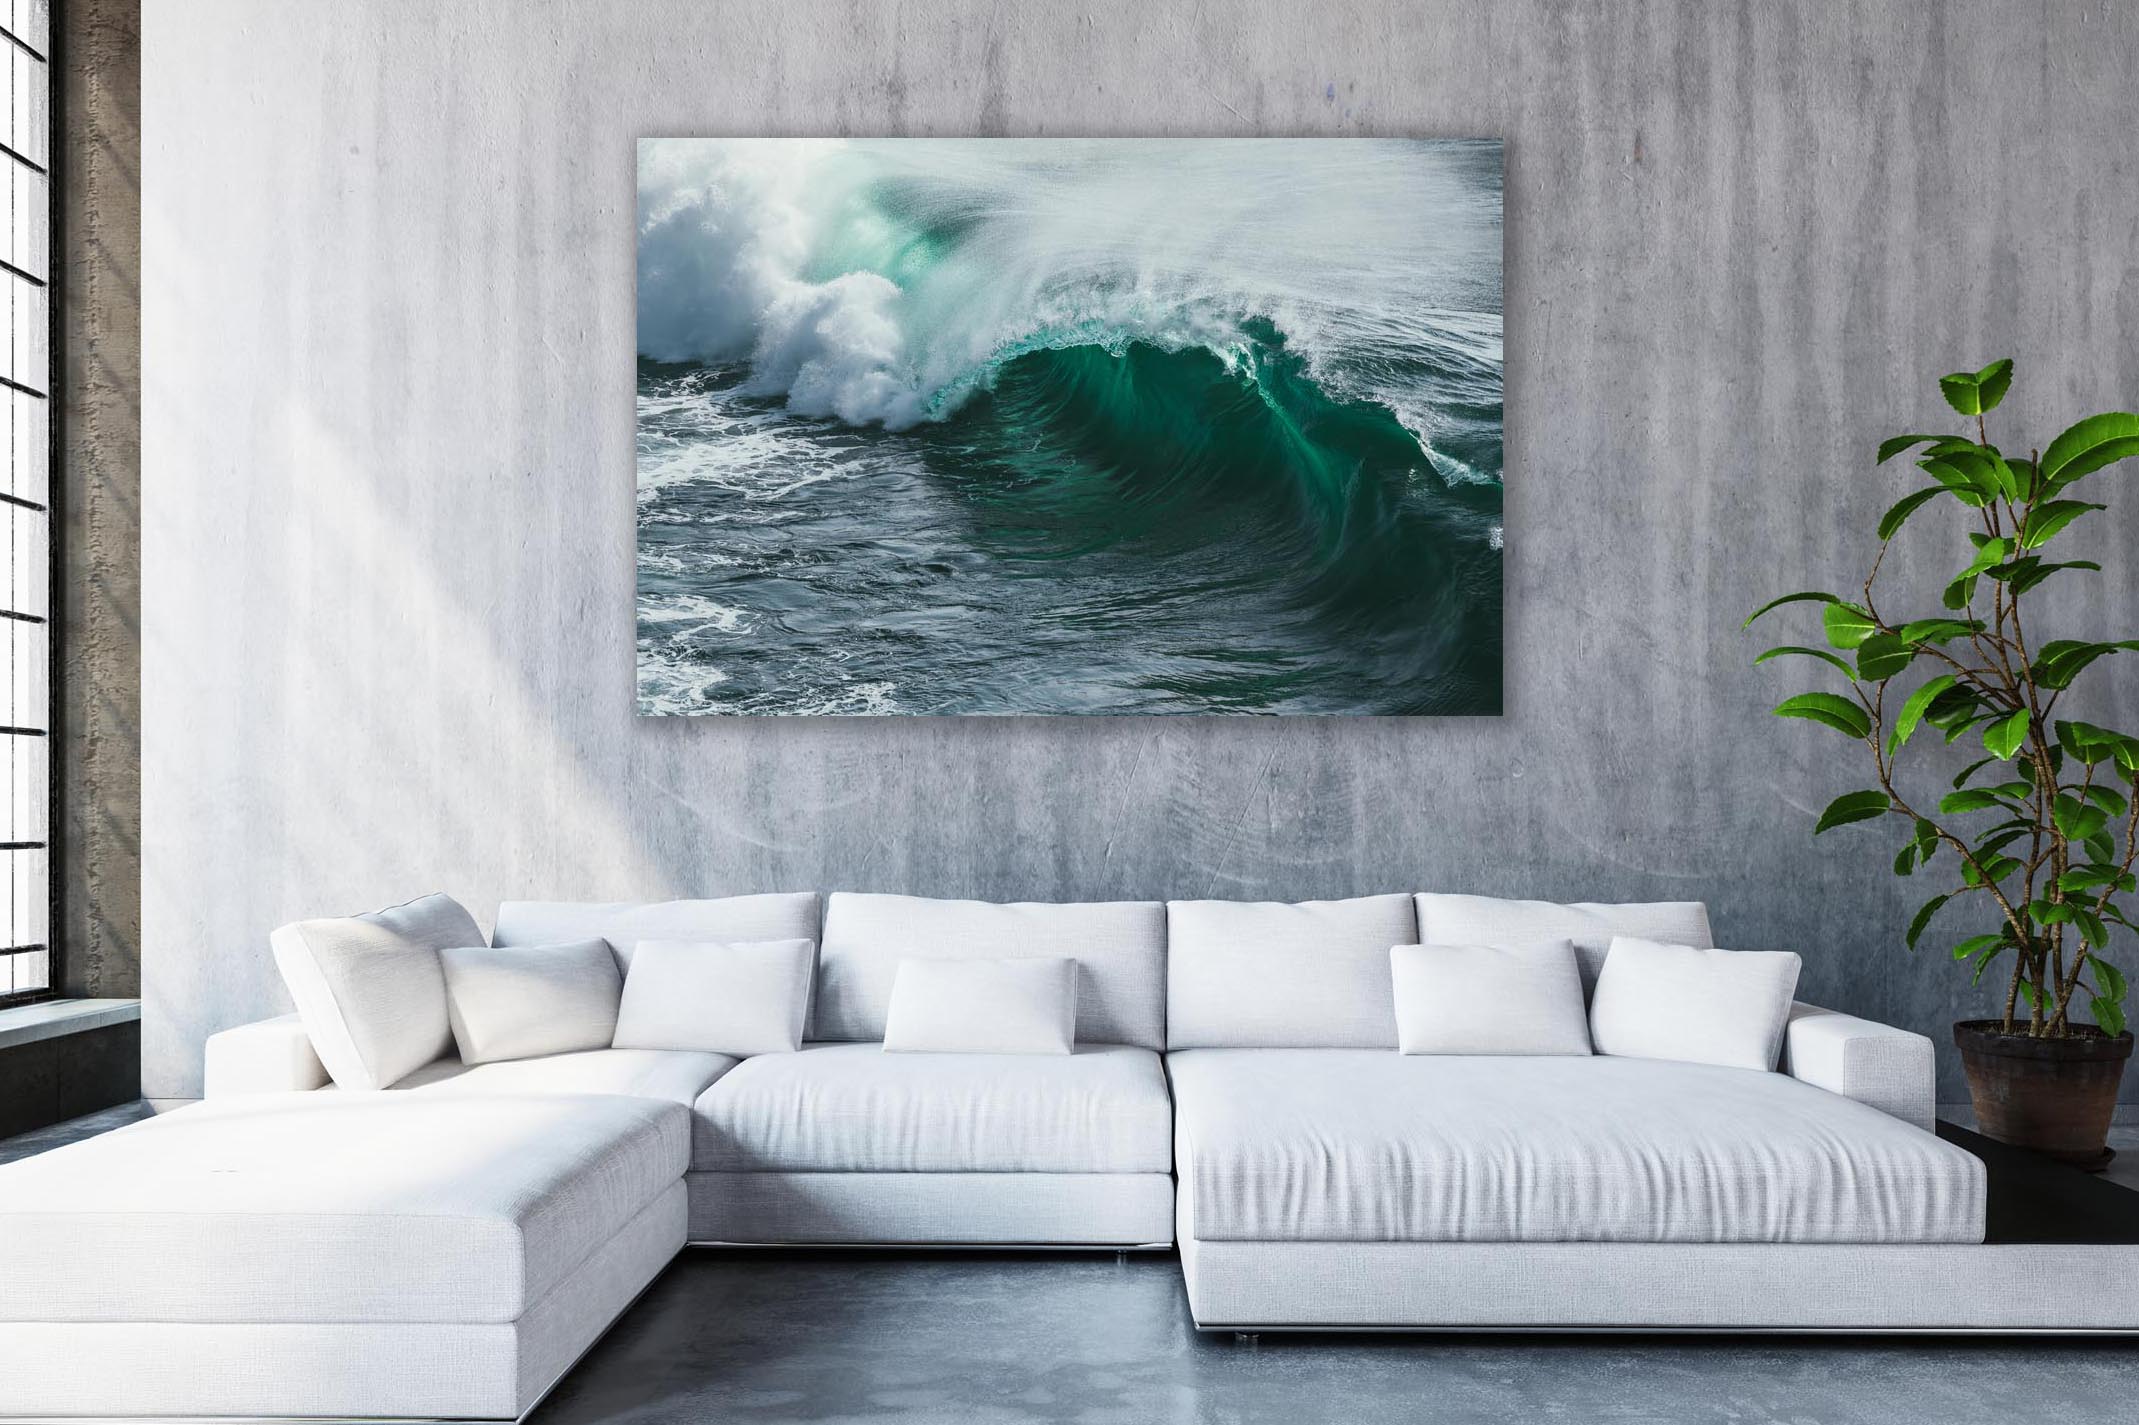 large white couch with image of huge wave